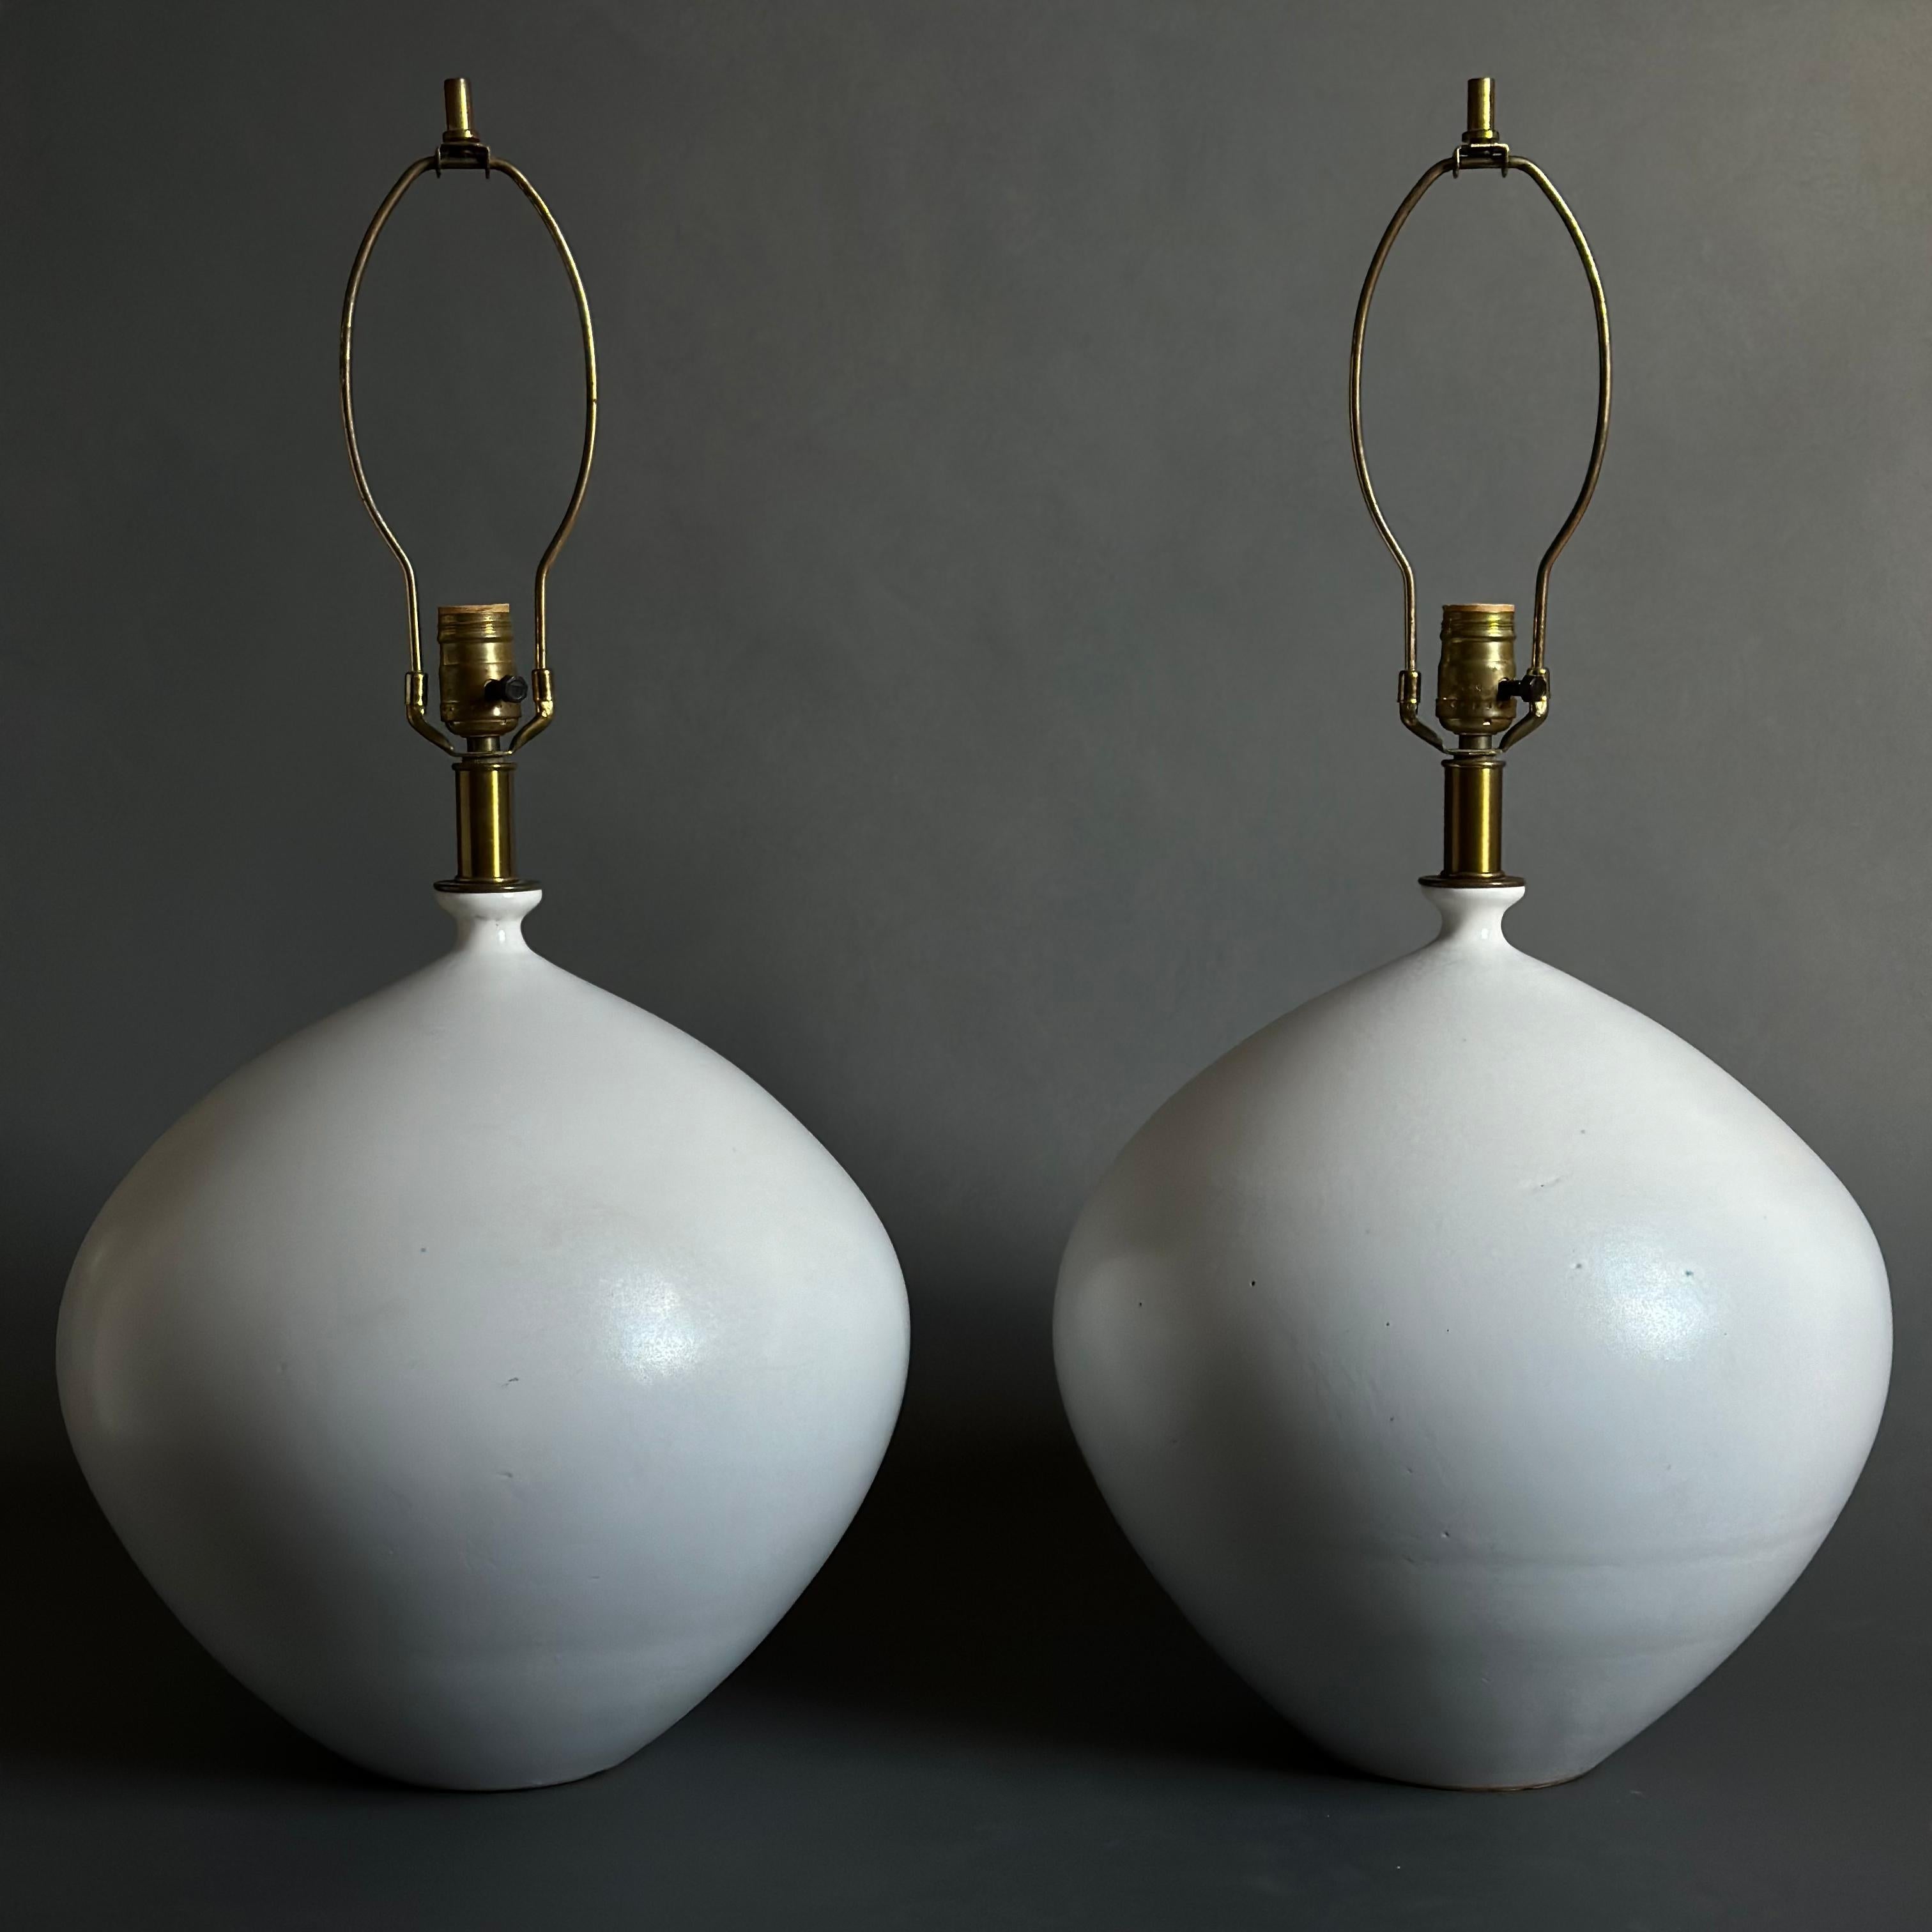 Pair of Large Scale Ceramic Table Lamps in Milk White Glaze by Design Technics In Good Condition For Sale In Brooklyn, NY